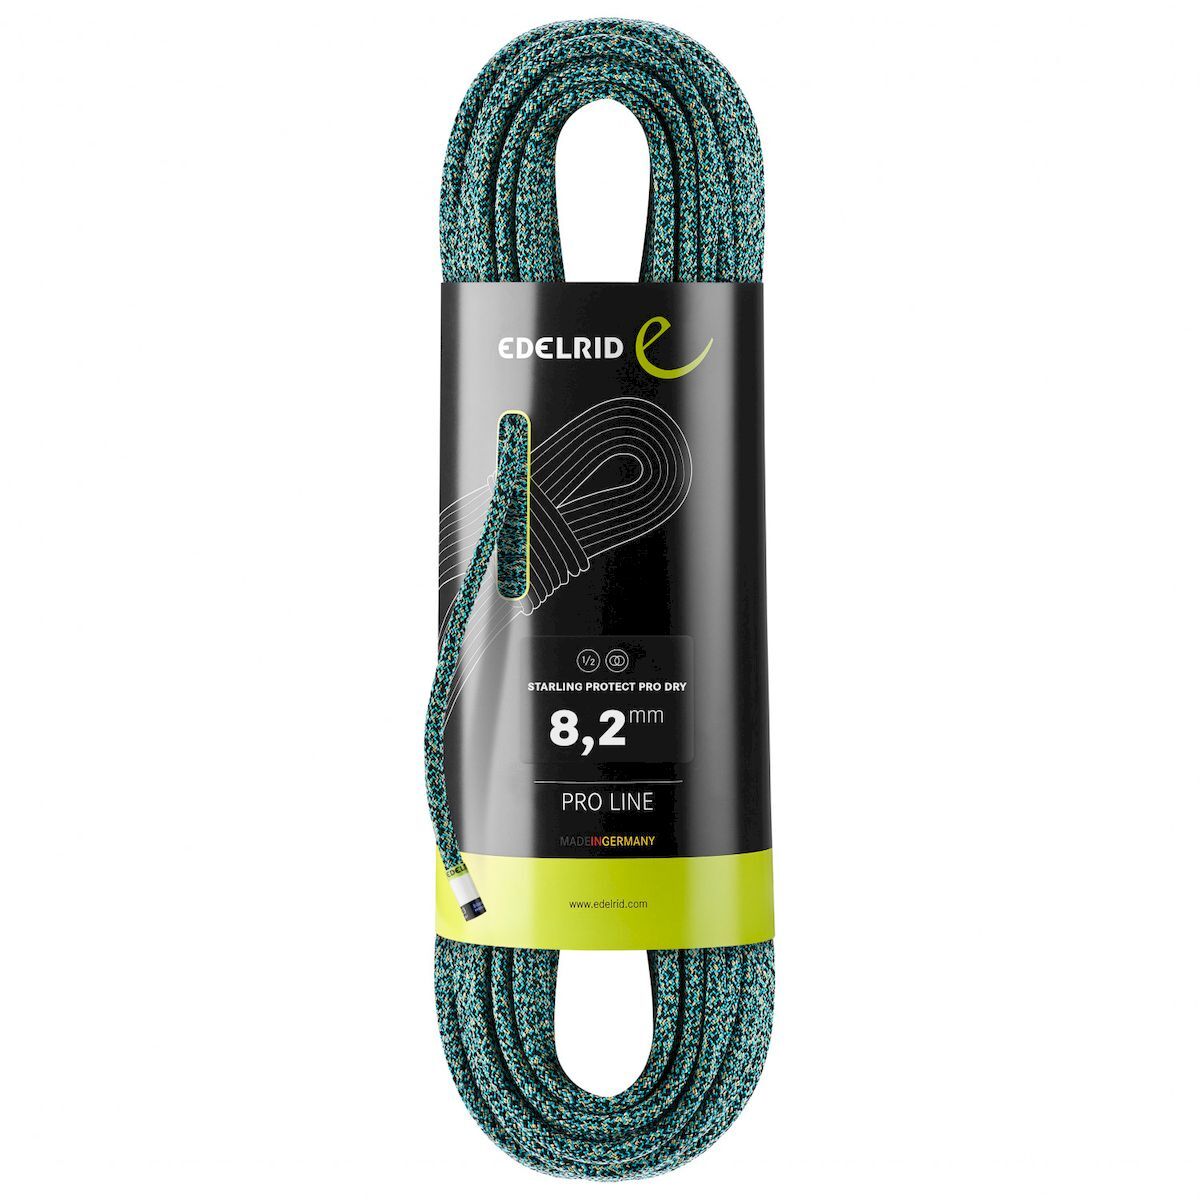 Edelrid Starling Protect Pro Dry 8,2 mm - Halftouw